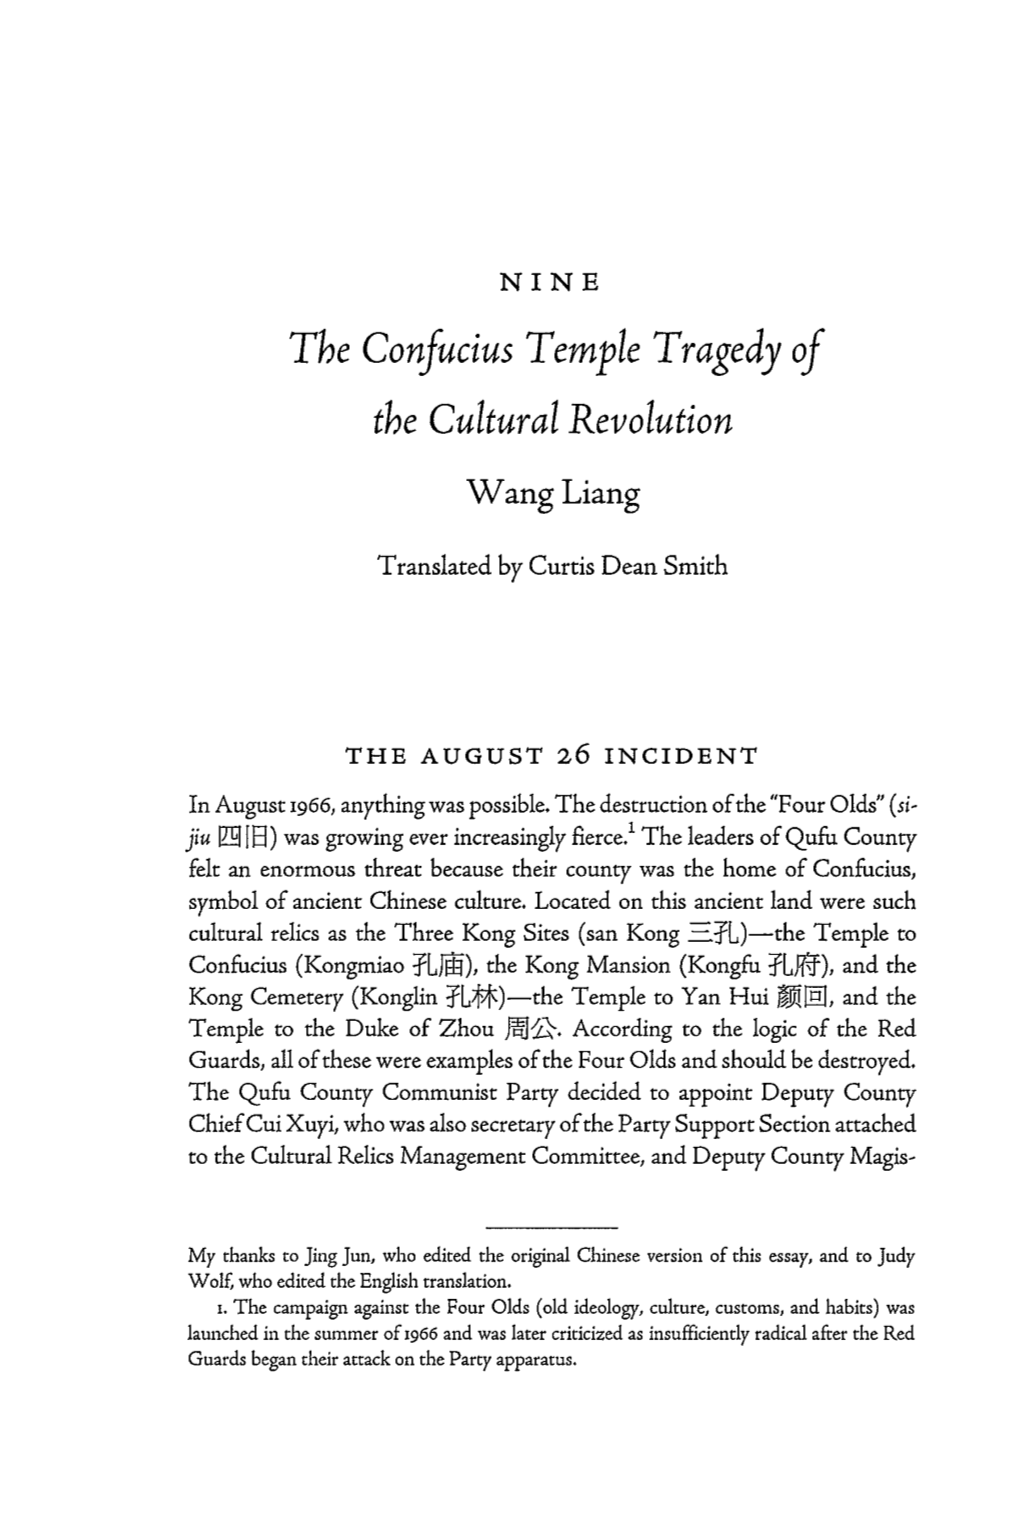 The Confucius Temple Tragedy of the Cultural Revolution